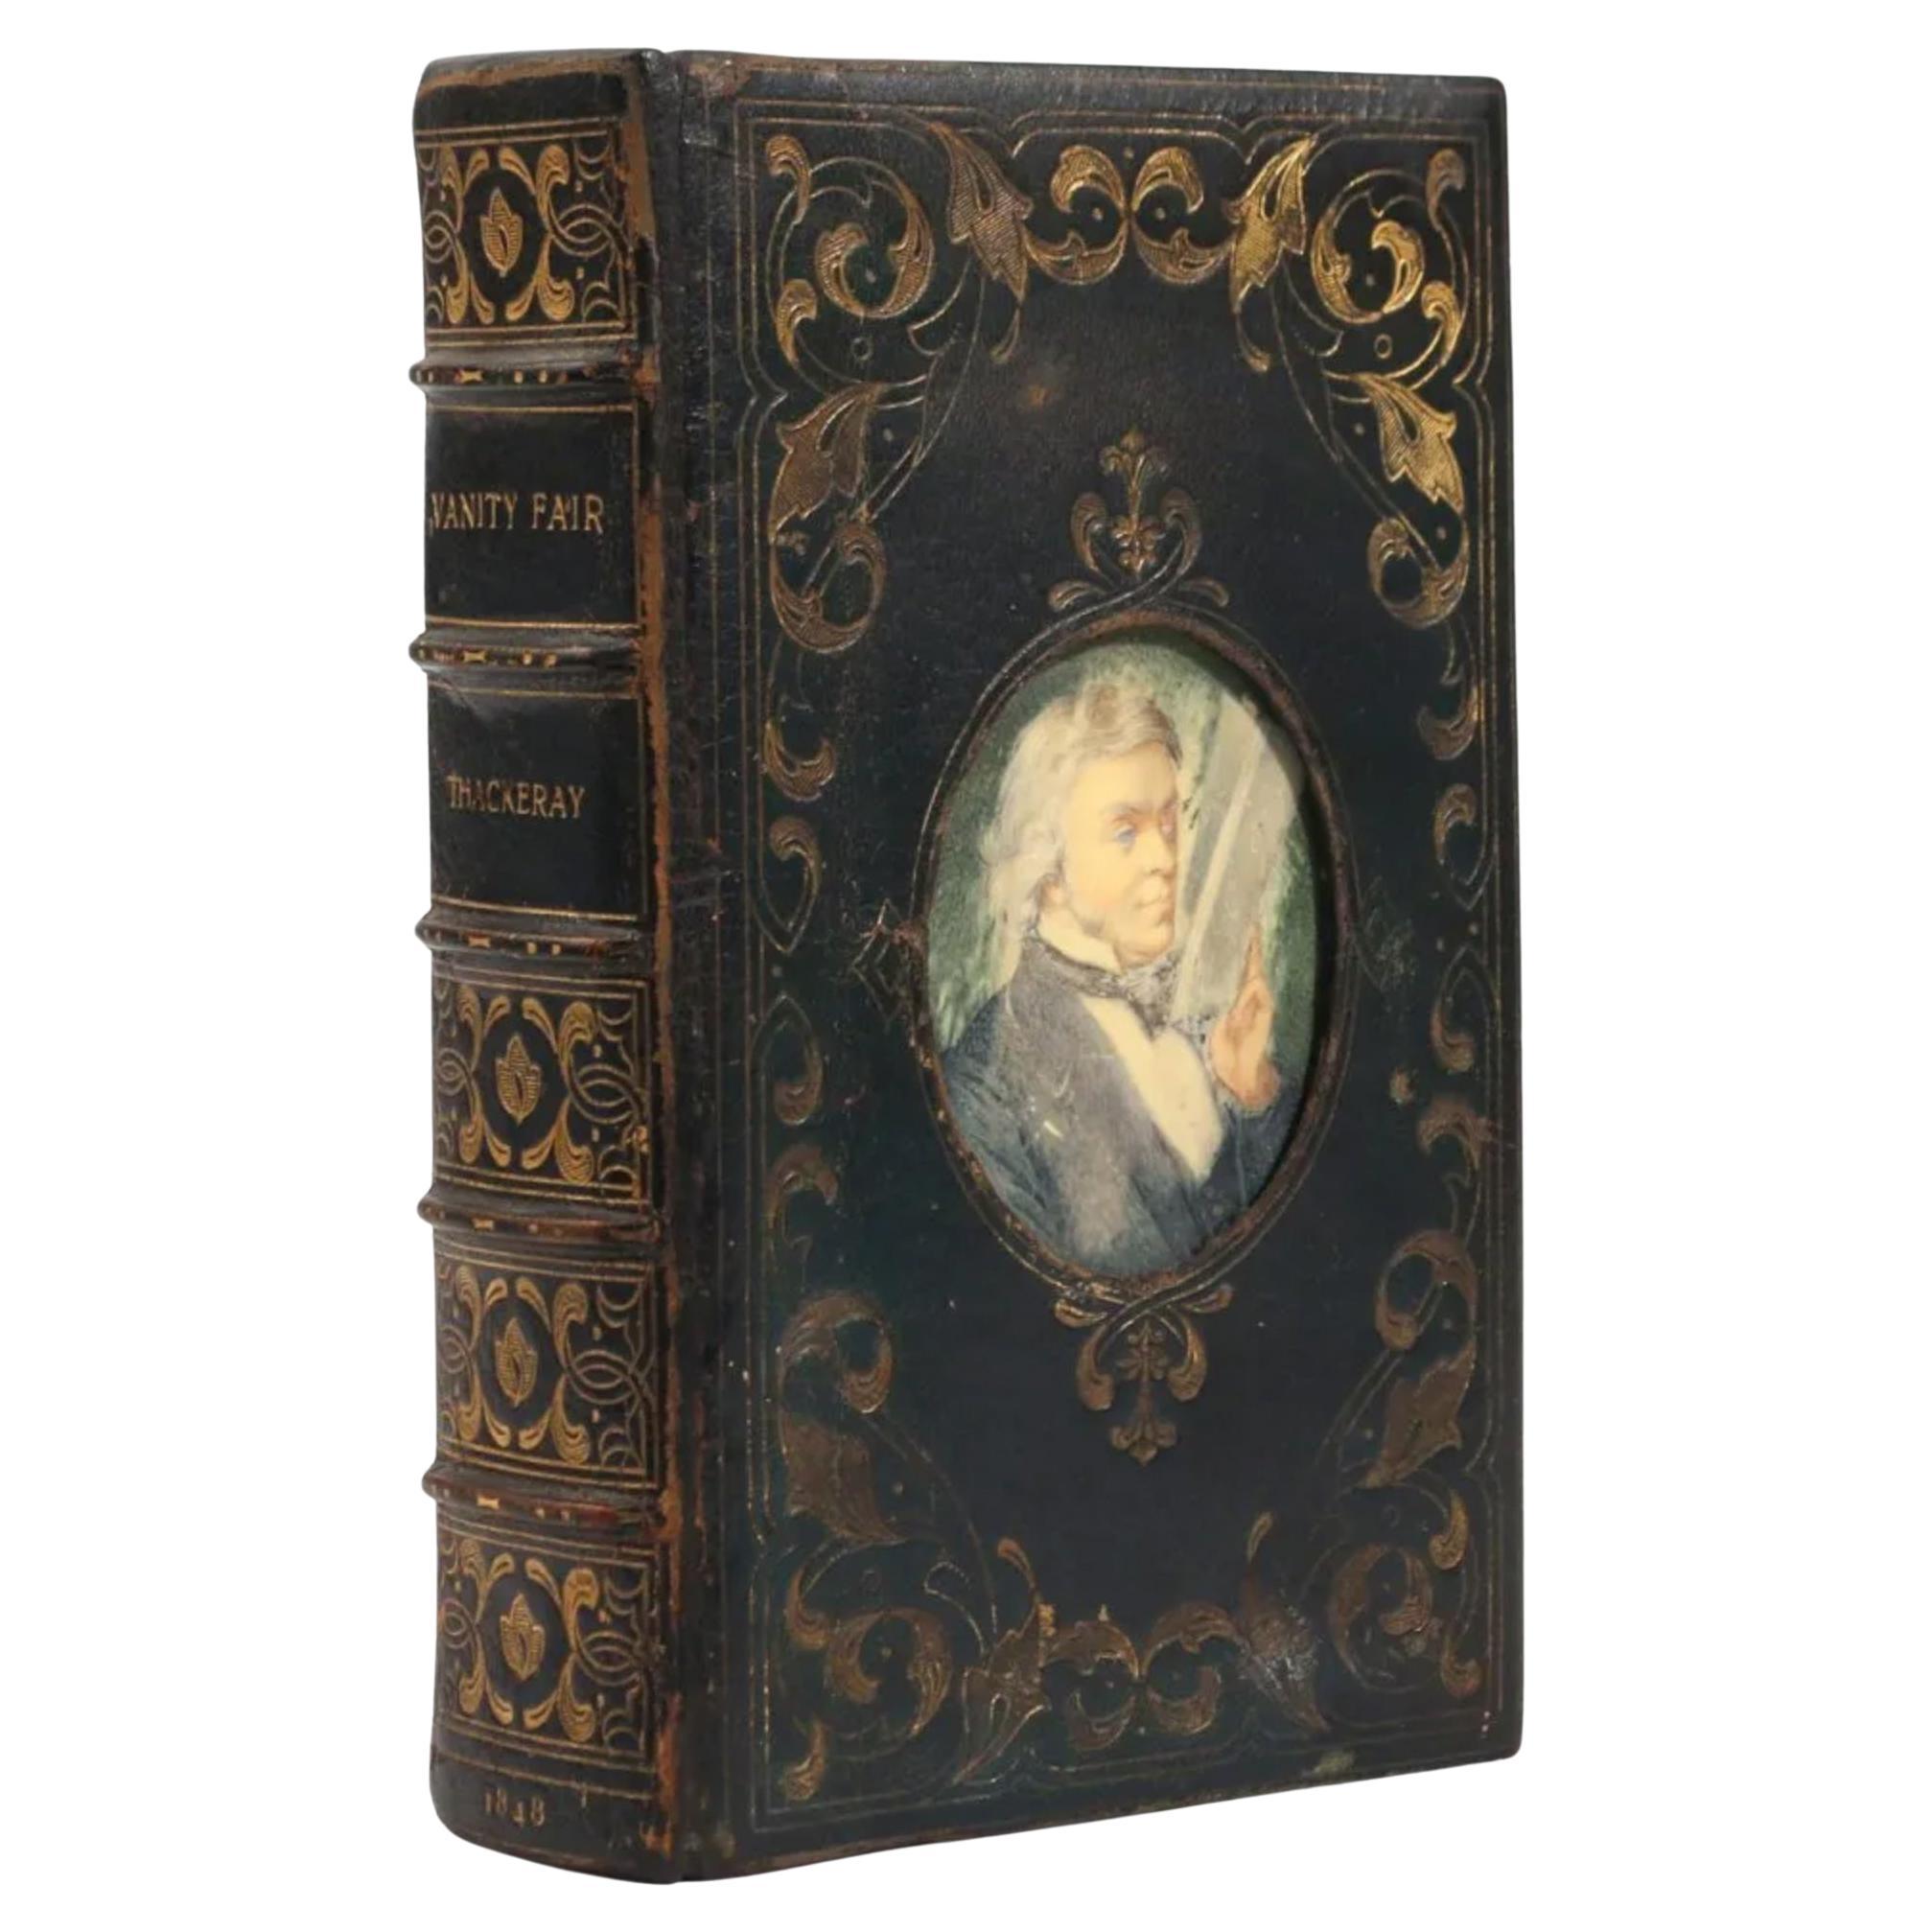 Vanity Fair by Wm.Thackeray, Cosway Style Binding, First Edition, First Issue For Sale